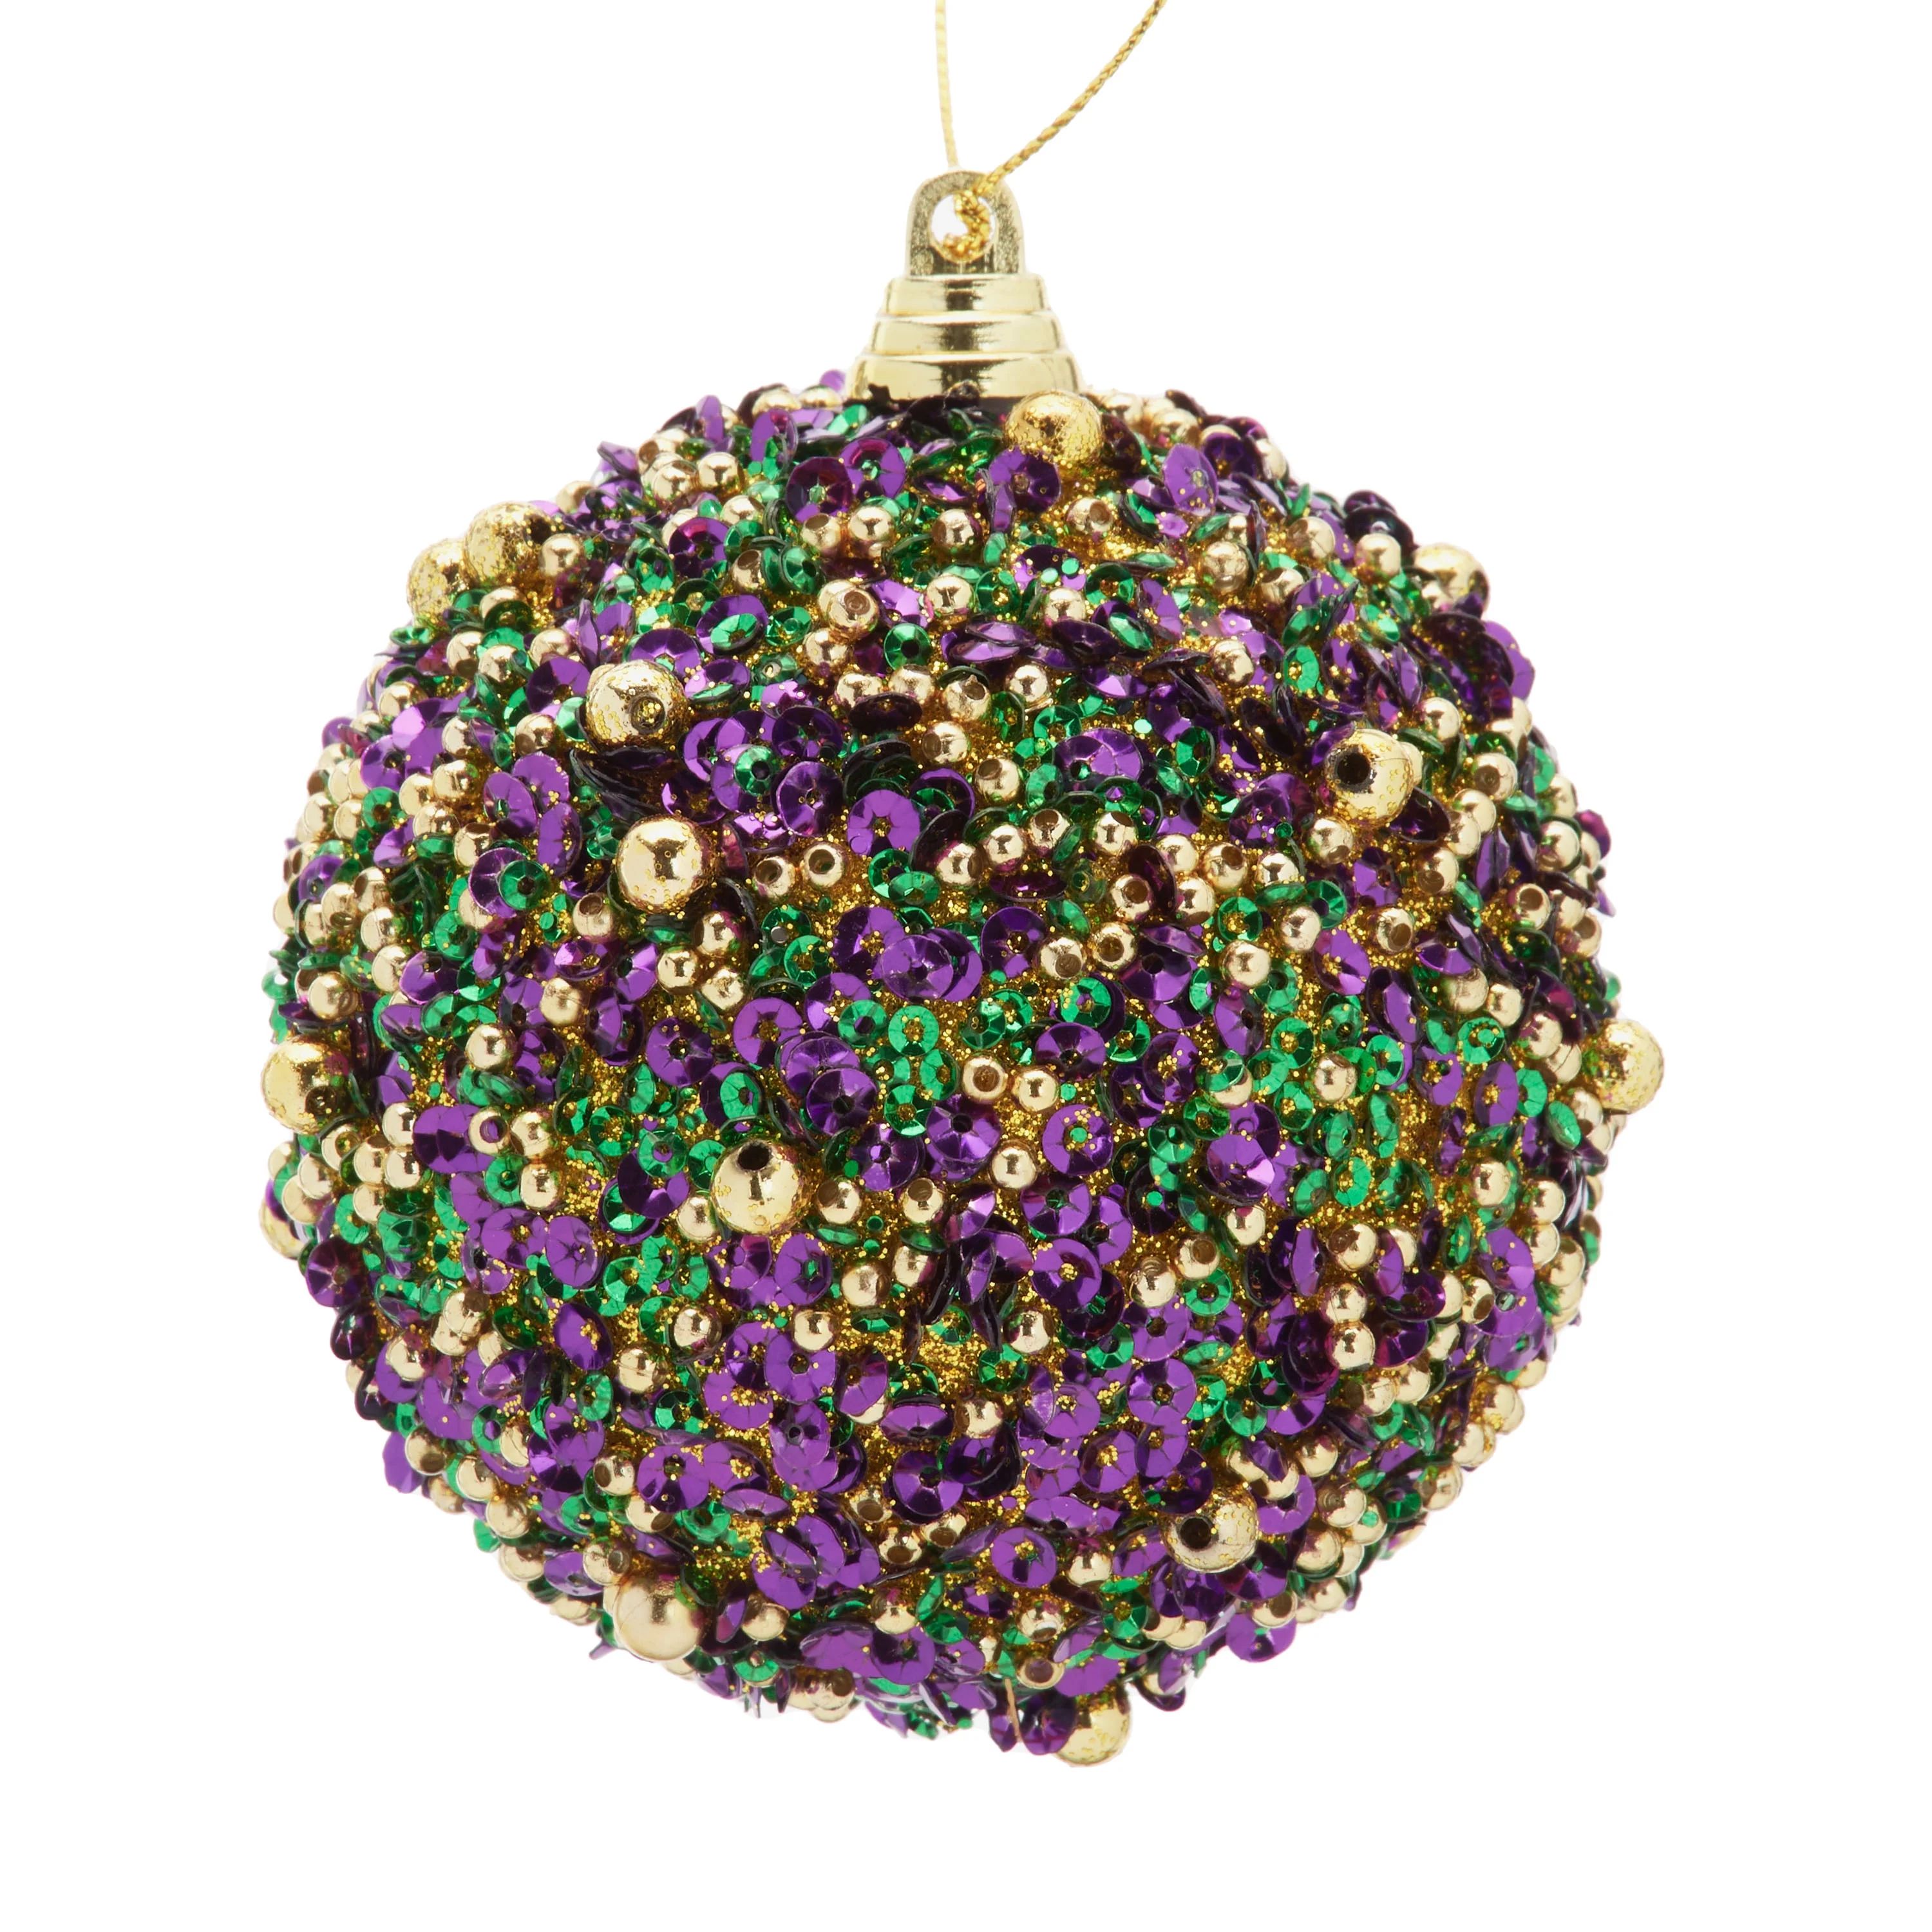 Way To Celebrate Mardi Gras Beads & Sequins Ornaments, 3 Count | Walmart (US)